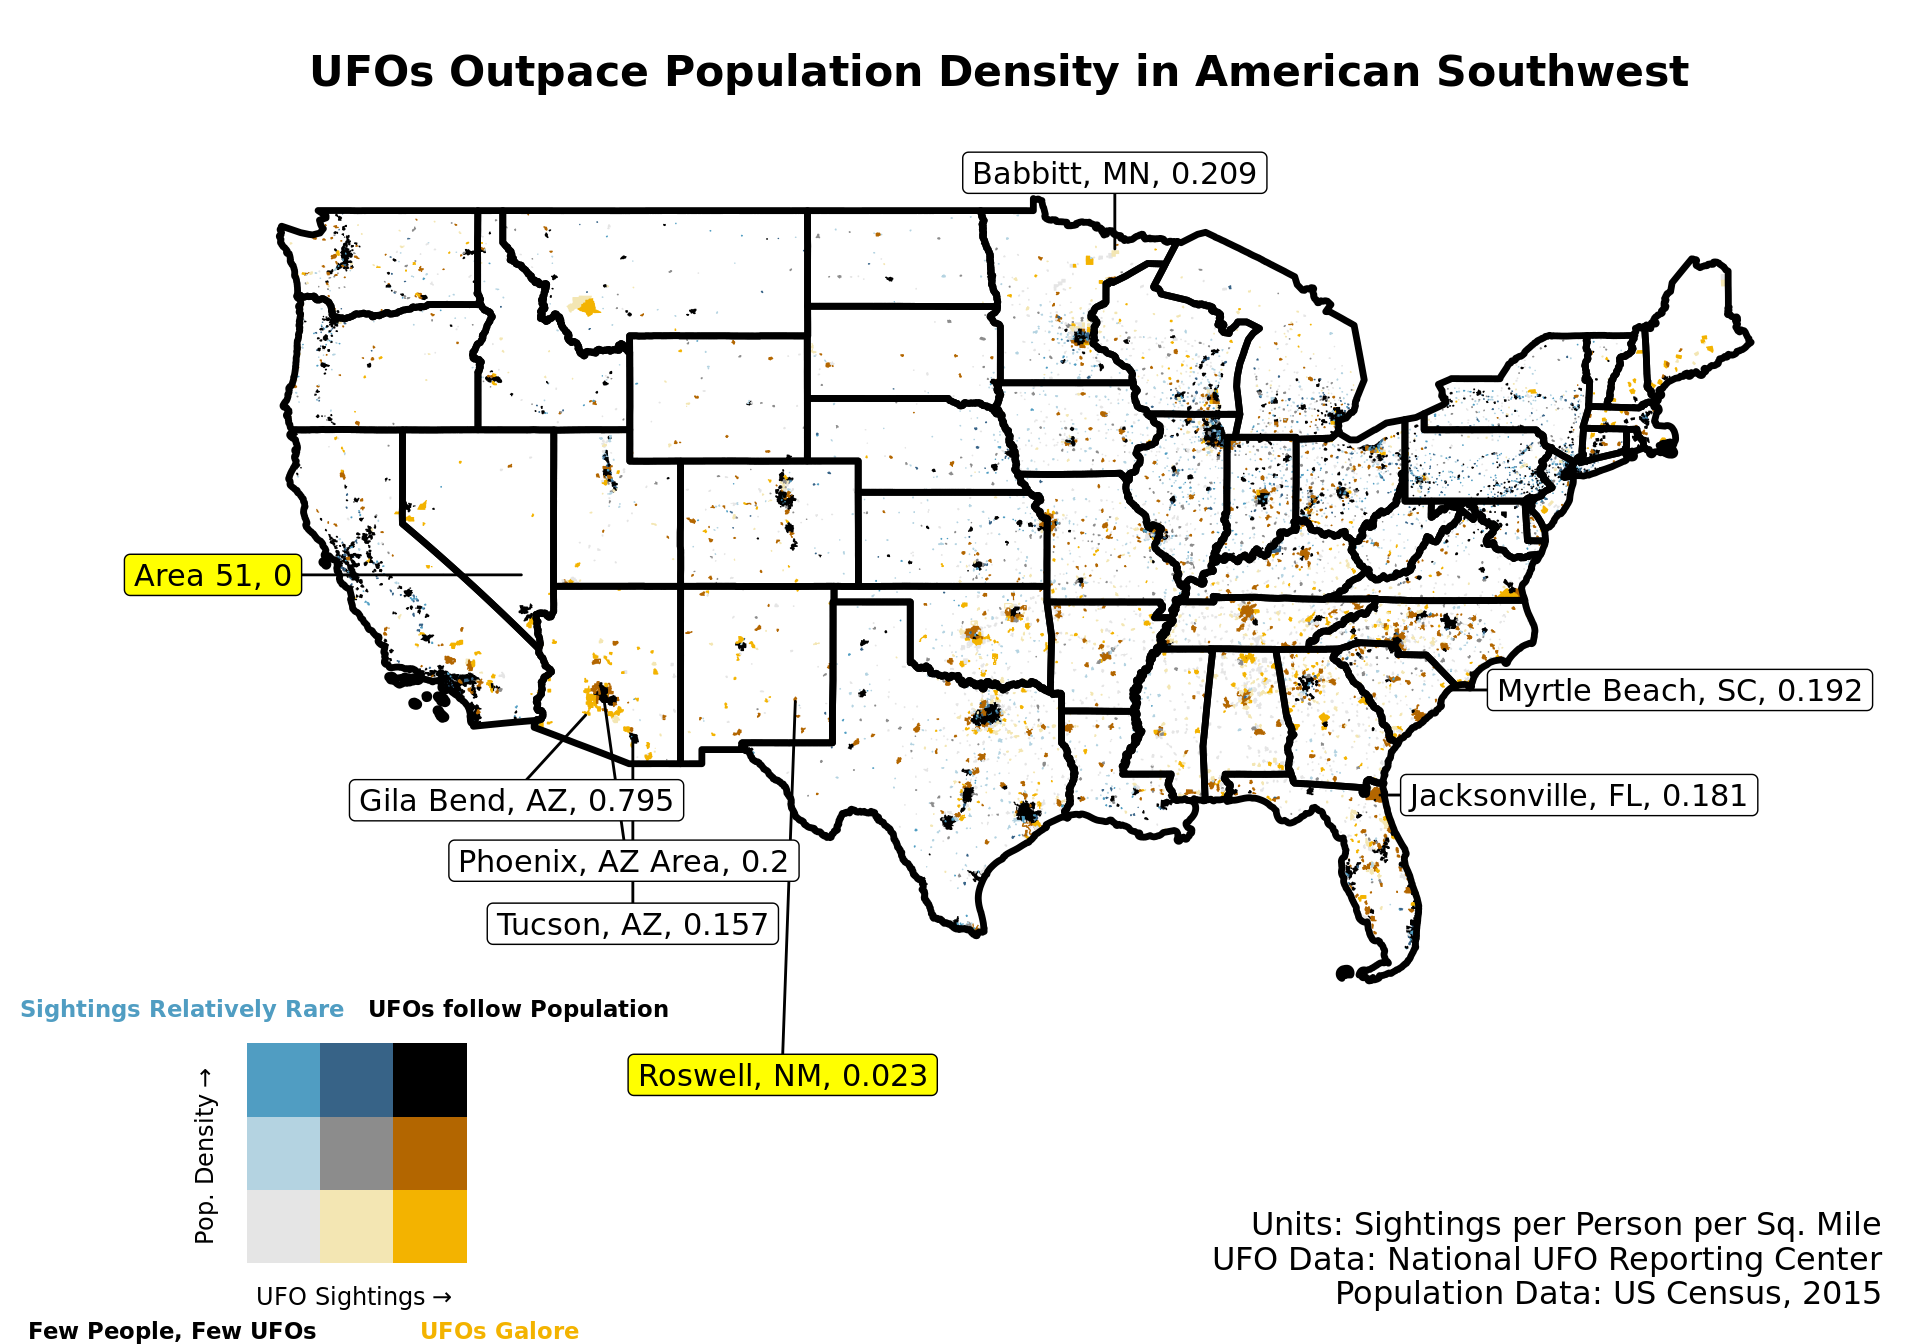 This is a map of the United States, with various cities shaded according to the number of UFO sightings recorded and their population density. The map is sparse, suggesting that most places have never experienced a UFO sighting. In general, there are a lot of UFO sightings in areas of high population (such as big cities), which are mostly colored as "UFOs follow Population" (high sightings, high density). Much of the northeast and midwest is colored as "Sightings Relatively Rare" (low sightings, high density), while much of the west is colored as "UFOs Galore" (high sightings, low population density).